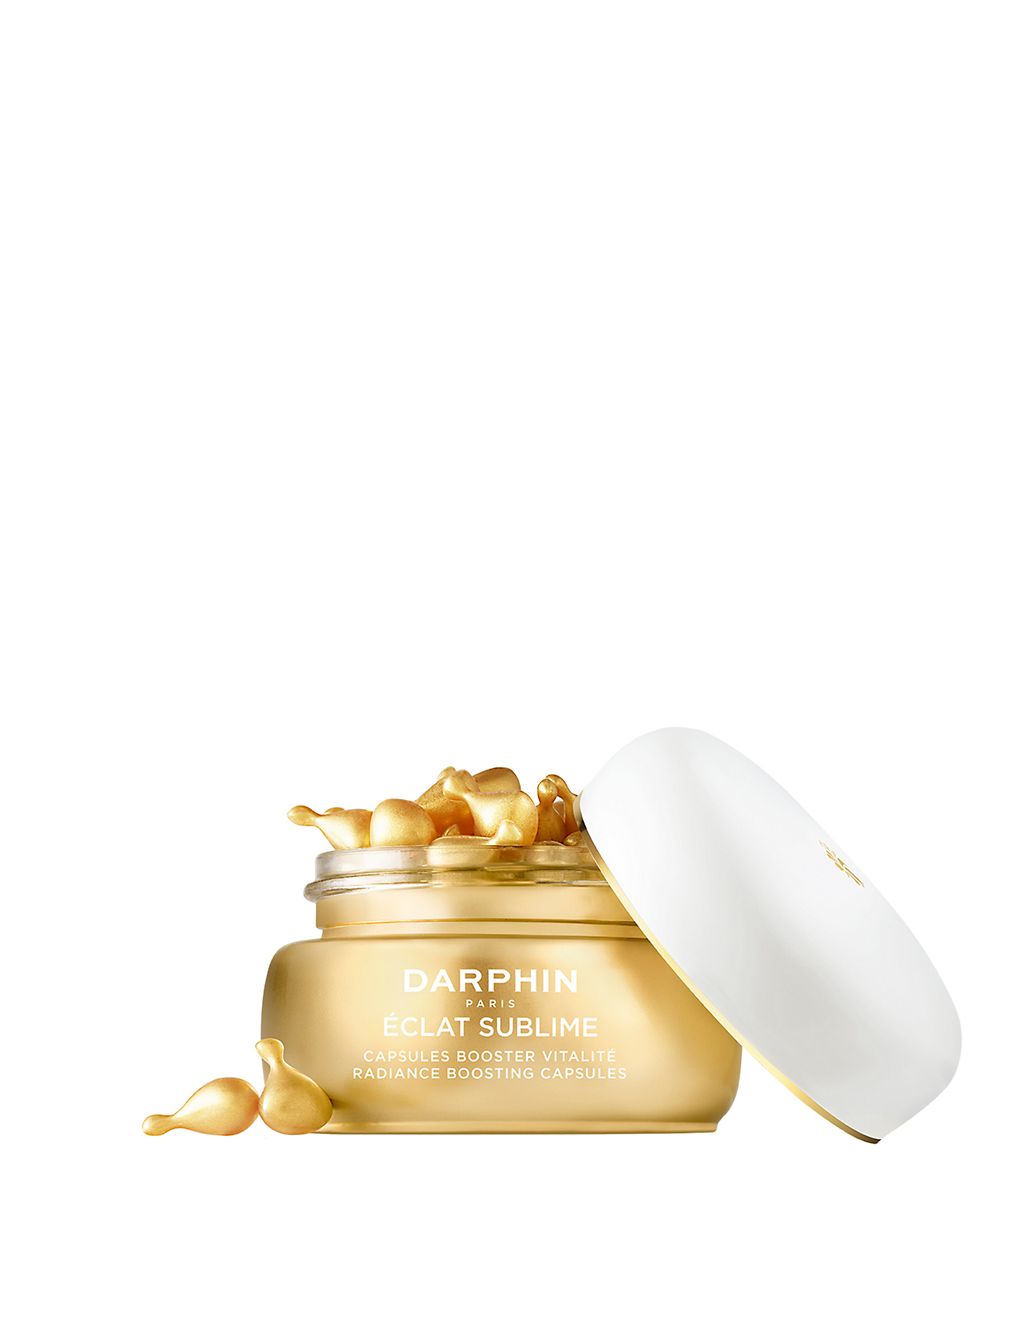 Eclat Sublime Radiance Boosting Capsules 20.4ml 1 of 3